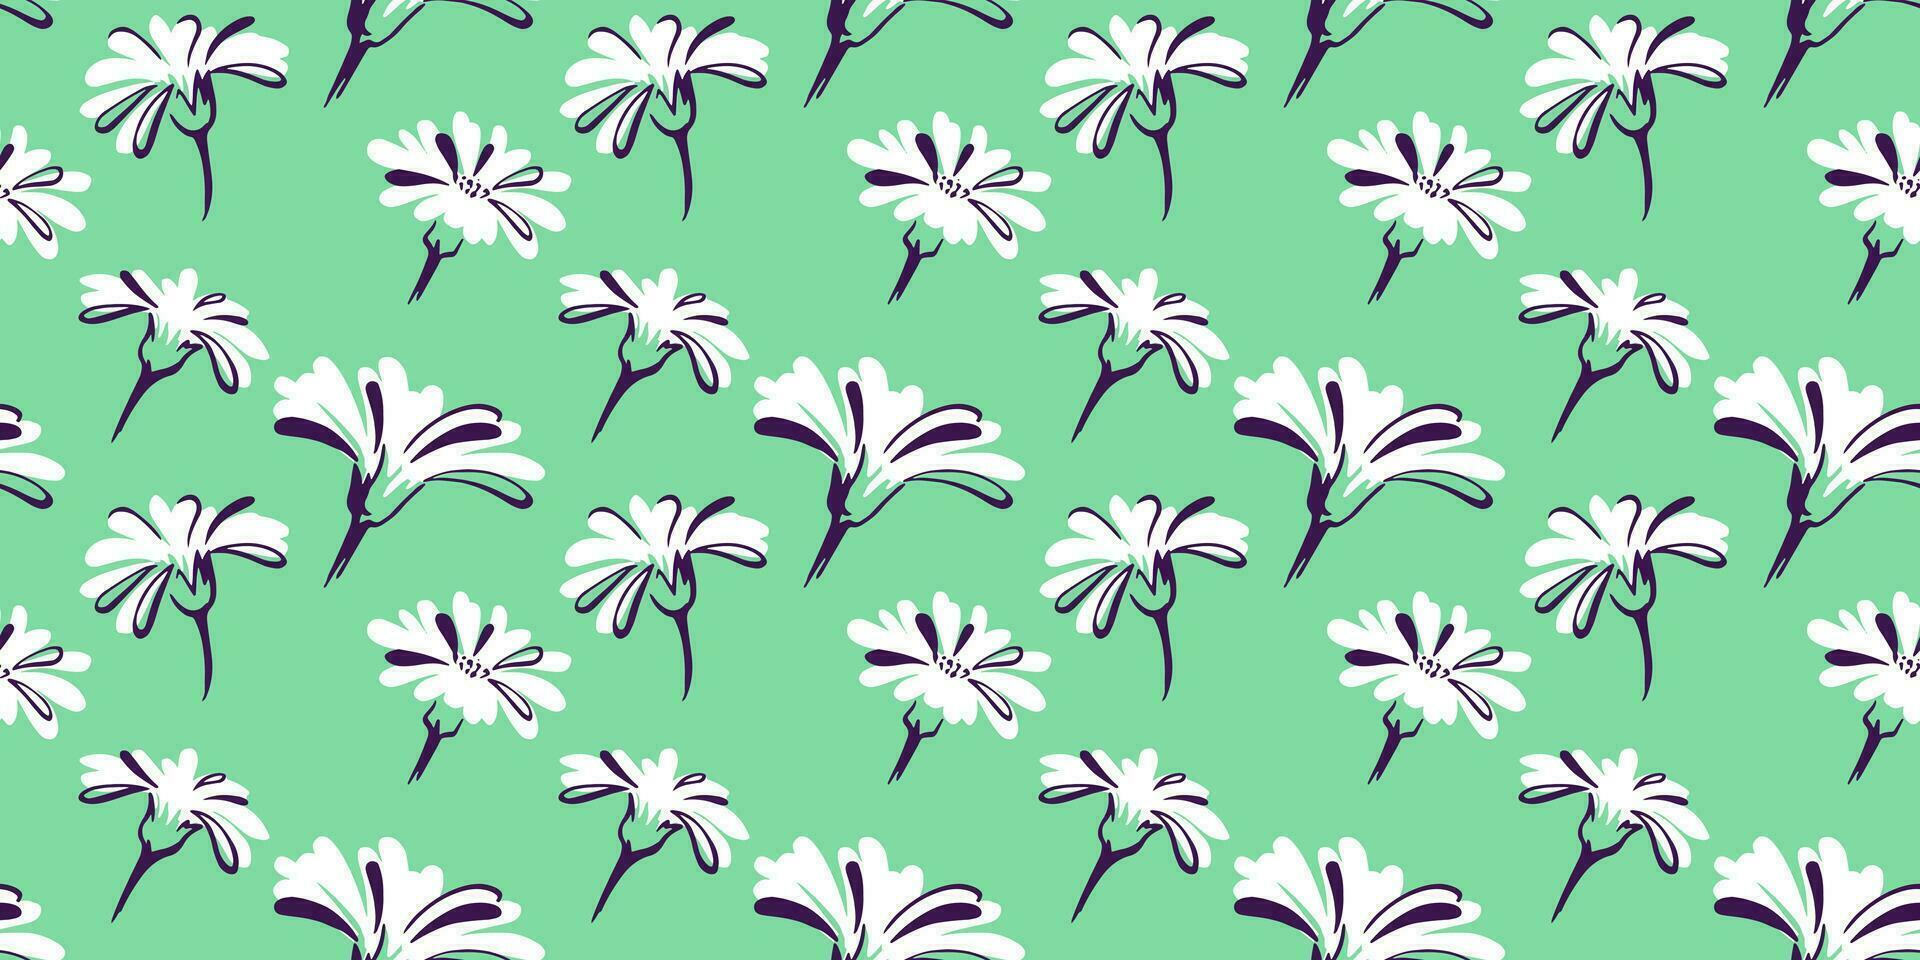 Abstract simple mint green summer pattern. Vector hand drawn buds flowers. Ditsy floral seamless background. Template for design, fashion, fabric, texture